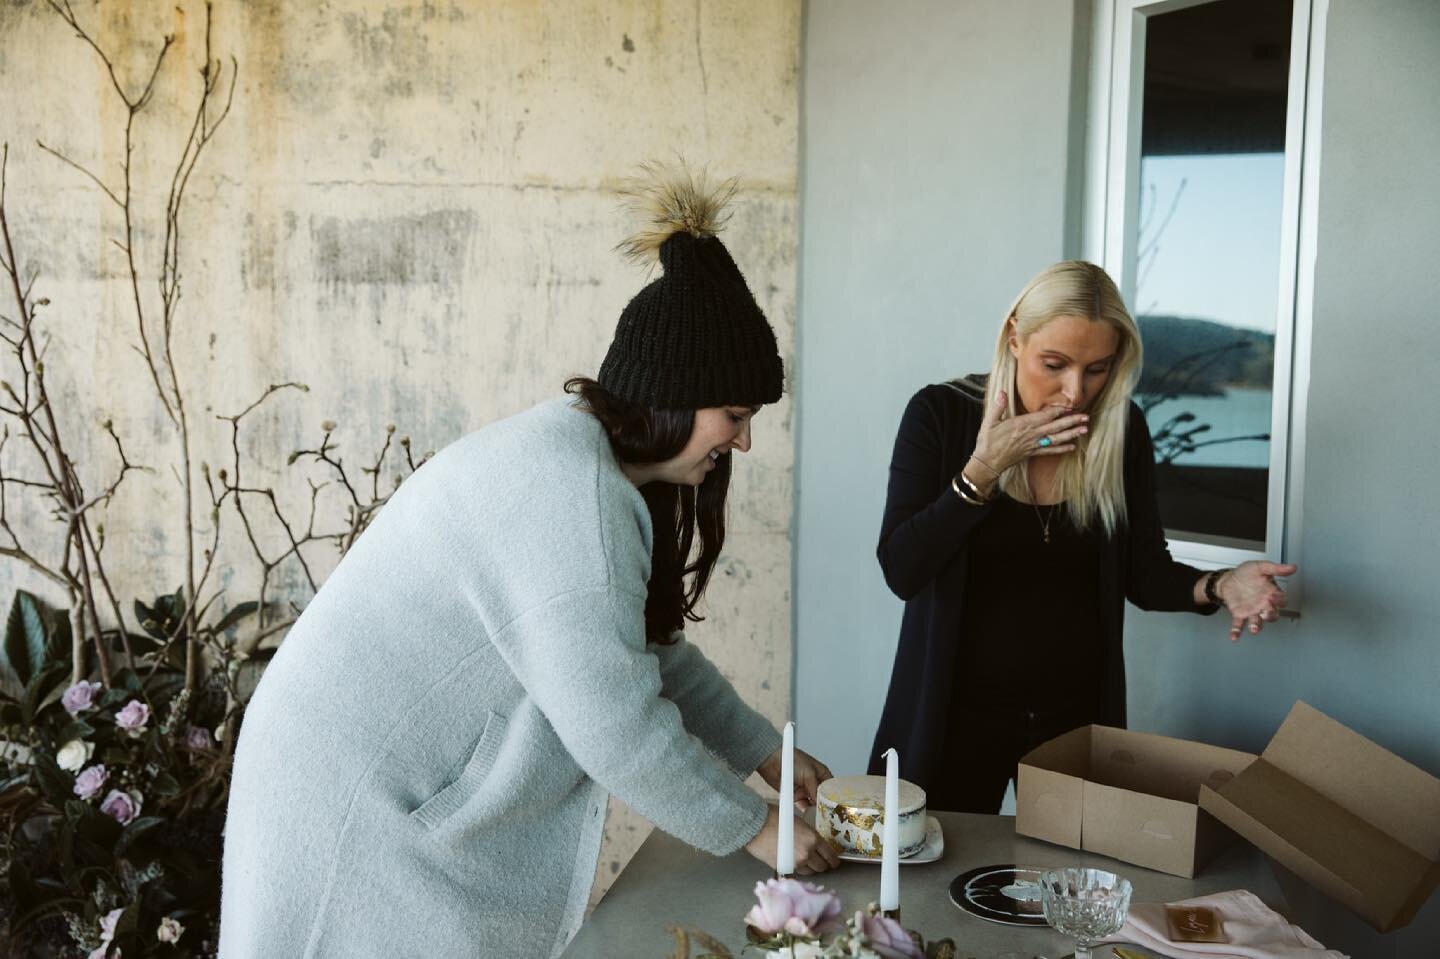 Working alongside industry pals is such a pleasure. We interviewed this gal and chatted all things business and life! Check out our latest blog to read more. 

Also @emmaline_photographer totally caught @thewhiteweddingclub taste testing @sageandgrac